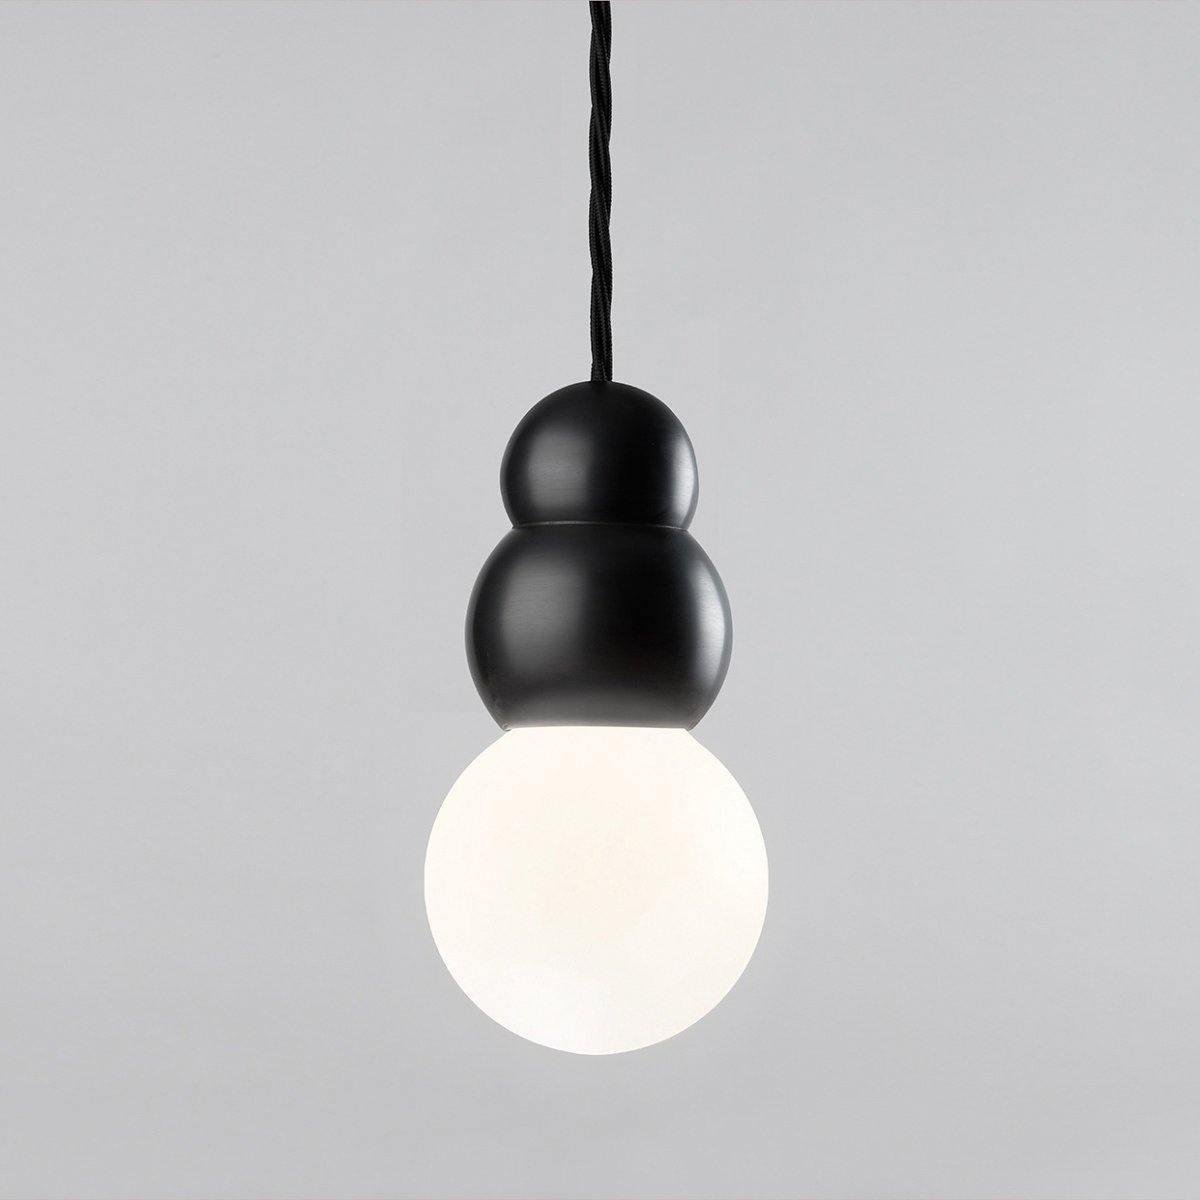 Black Flex Ball Light Pendant Series, measuring 3.9 inches in diameter and 6.81 inches in height (or 10cm in diameter and 17.3cm in height)